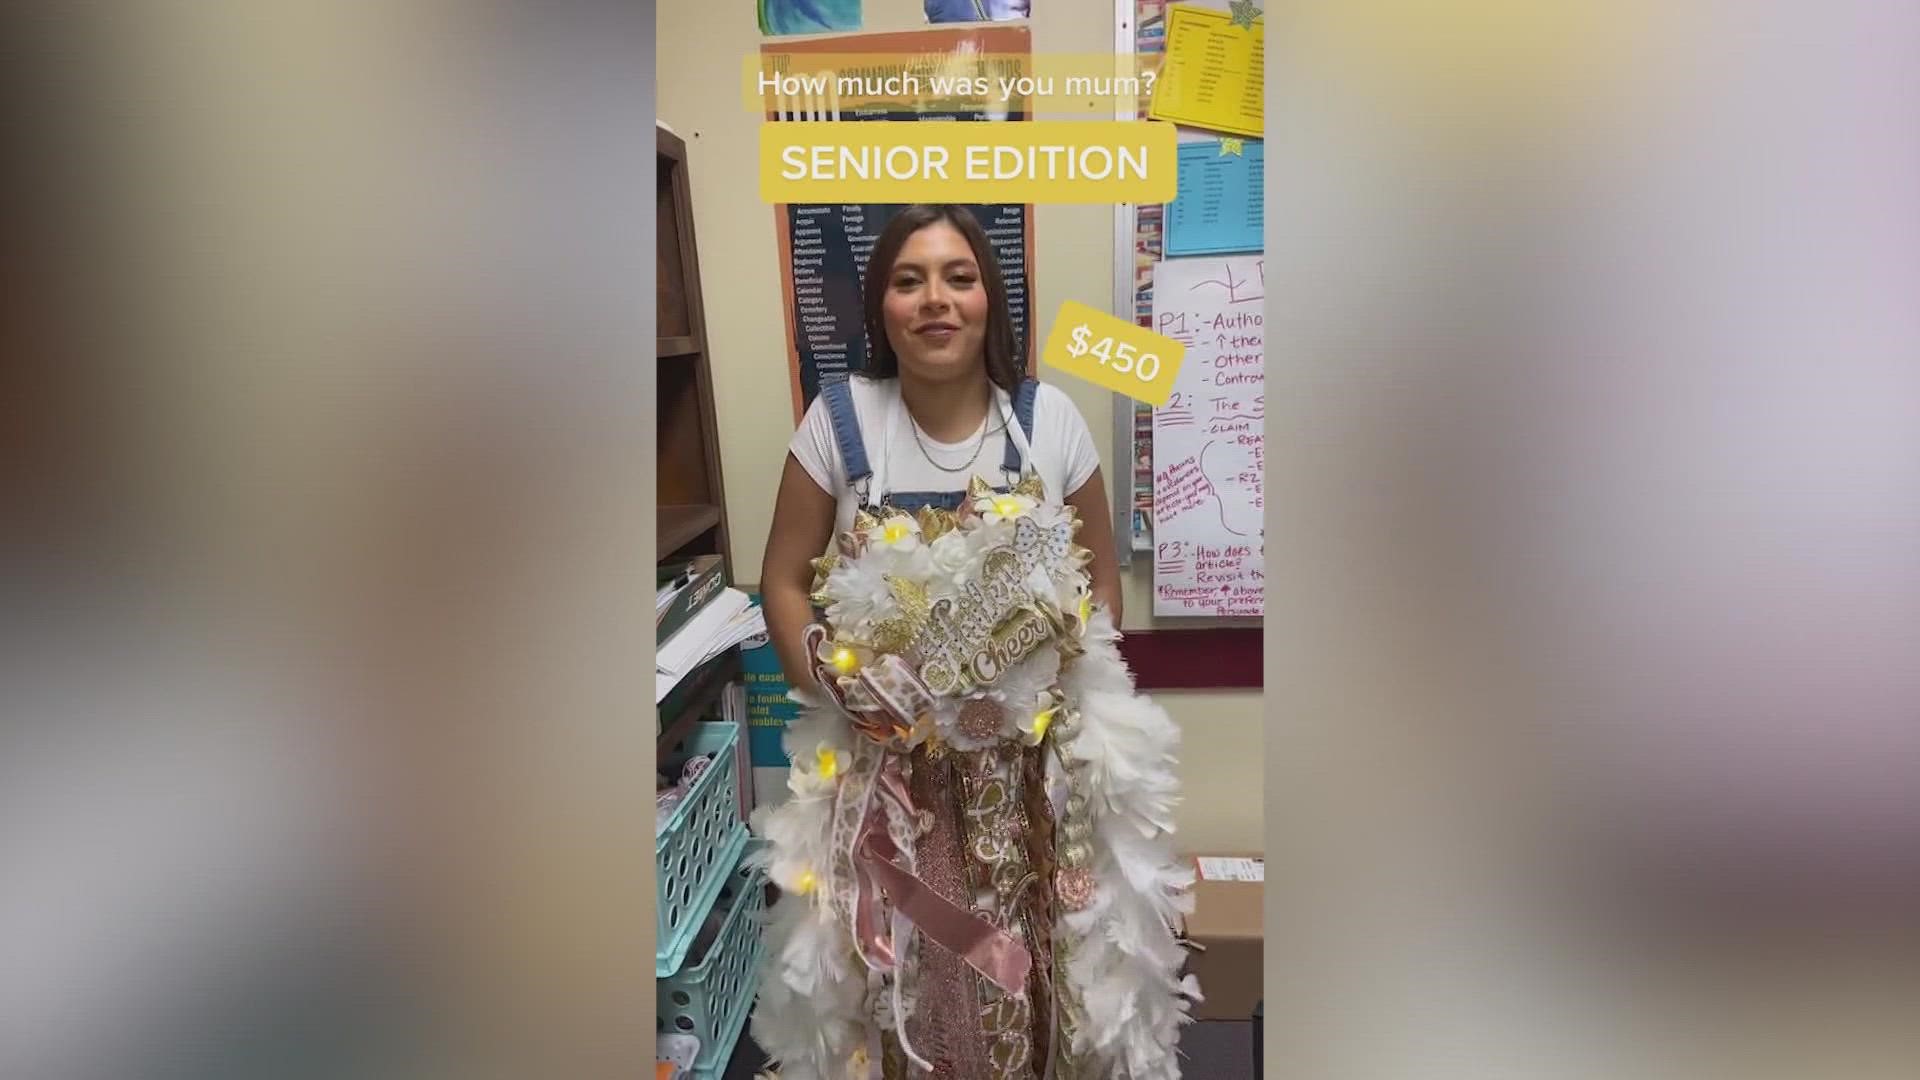 A TikTok has gone viral about the prices of homecoming mums in Texas.